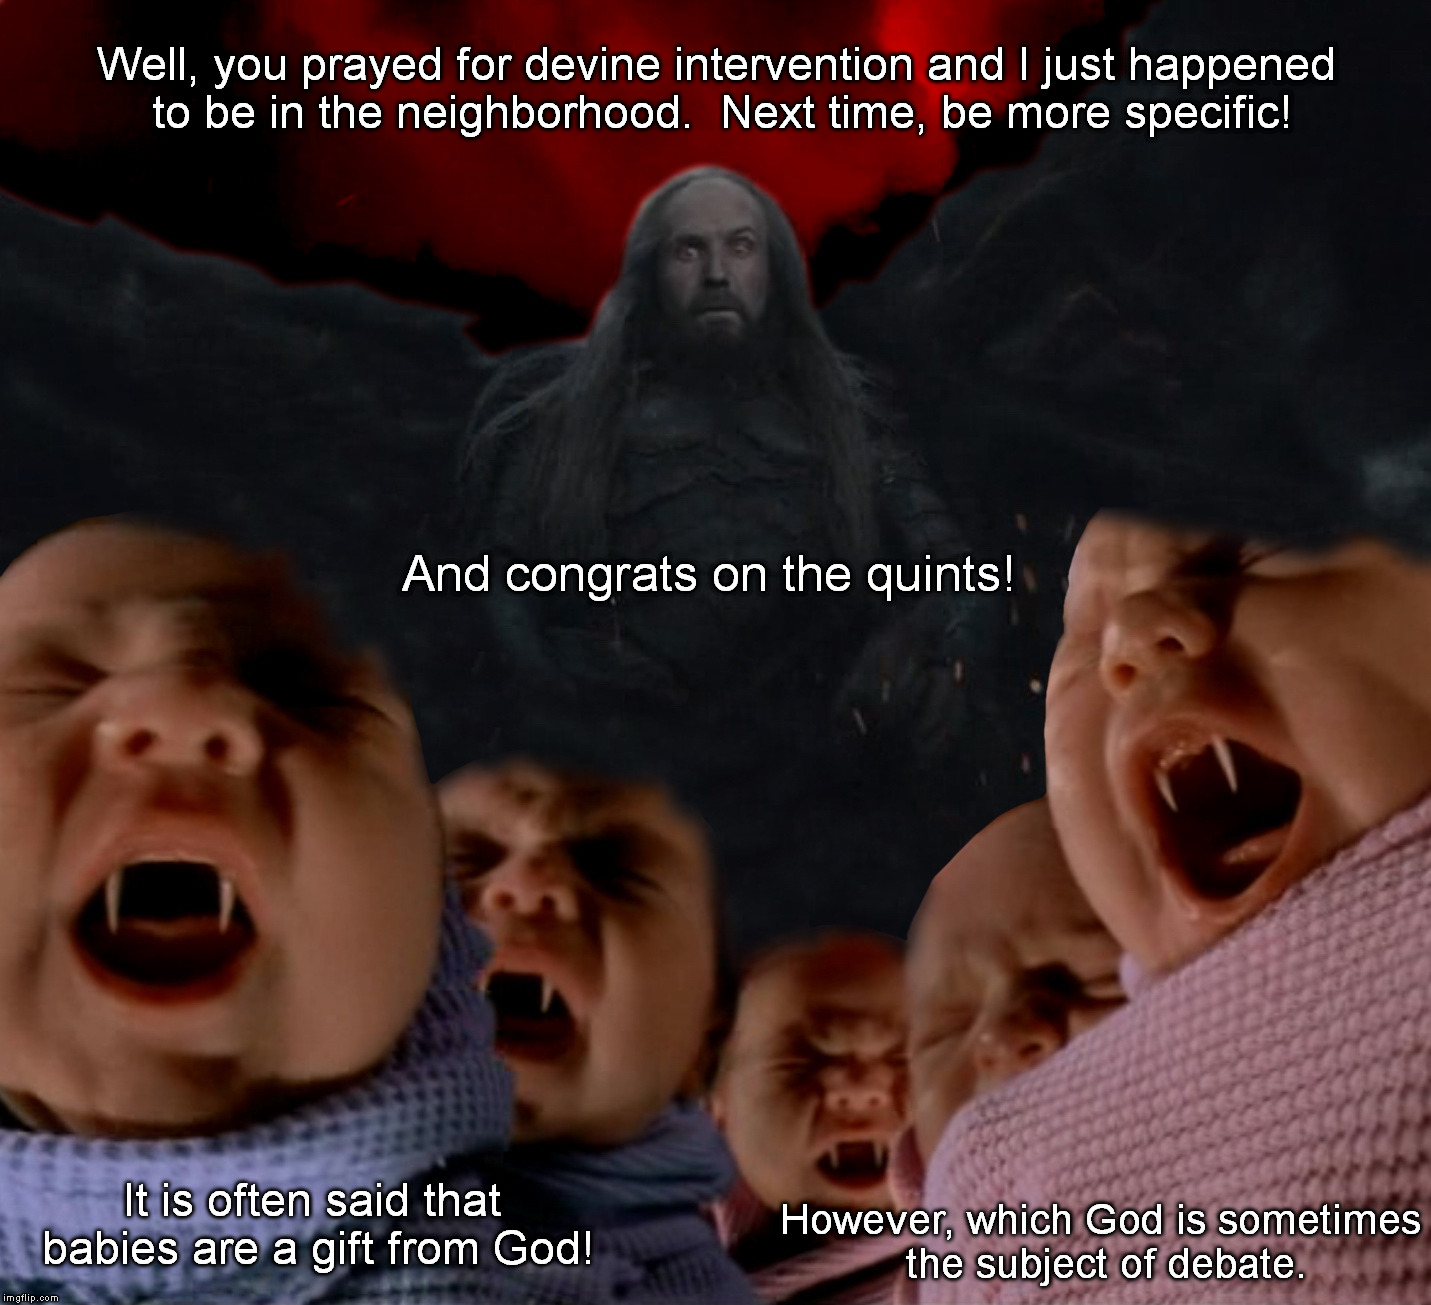 Be Careful What You Ask For | Well, you prayed for devine intervention and I just happened to be in the neighborhood.  Next time, be more specific! And congrats on the quints! However, which God is sometimes the subject of debate. It is often said that babies are a gift from God! | image tagged in babies | made w/ Imgflip meme maker